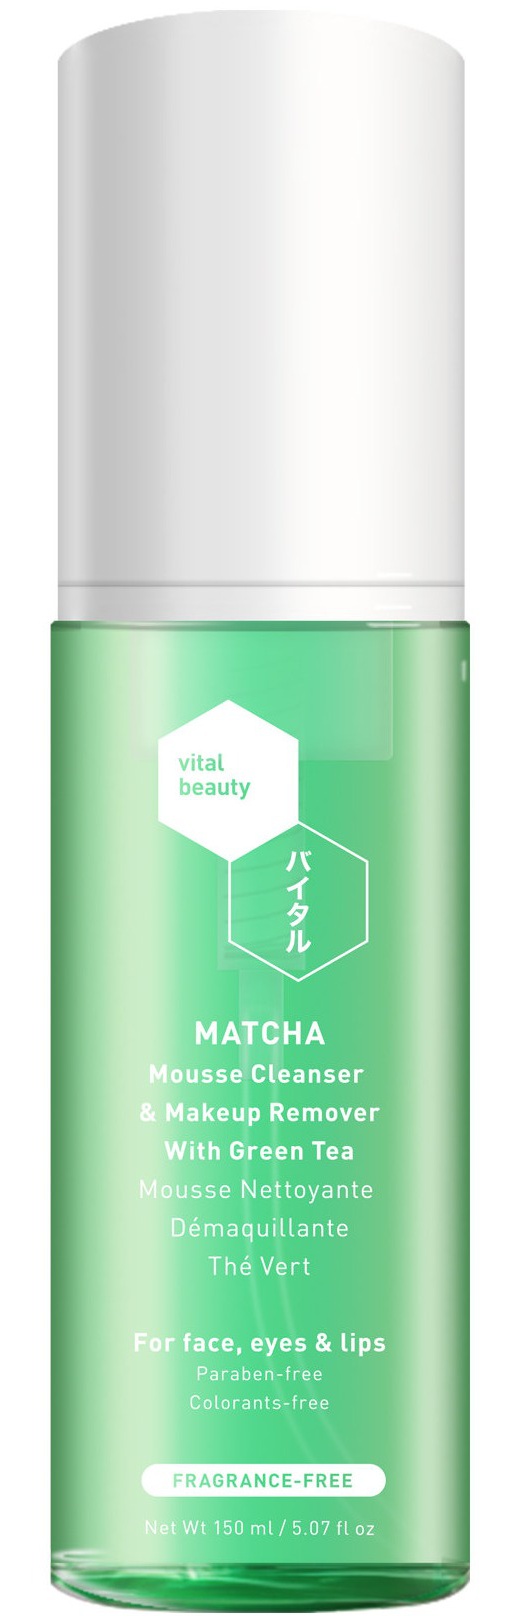 Vital Beauty Matcha Mousse Cleanser & Makeup Remover